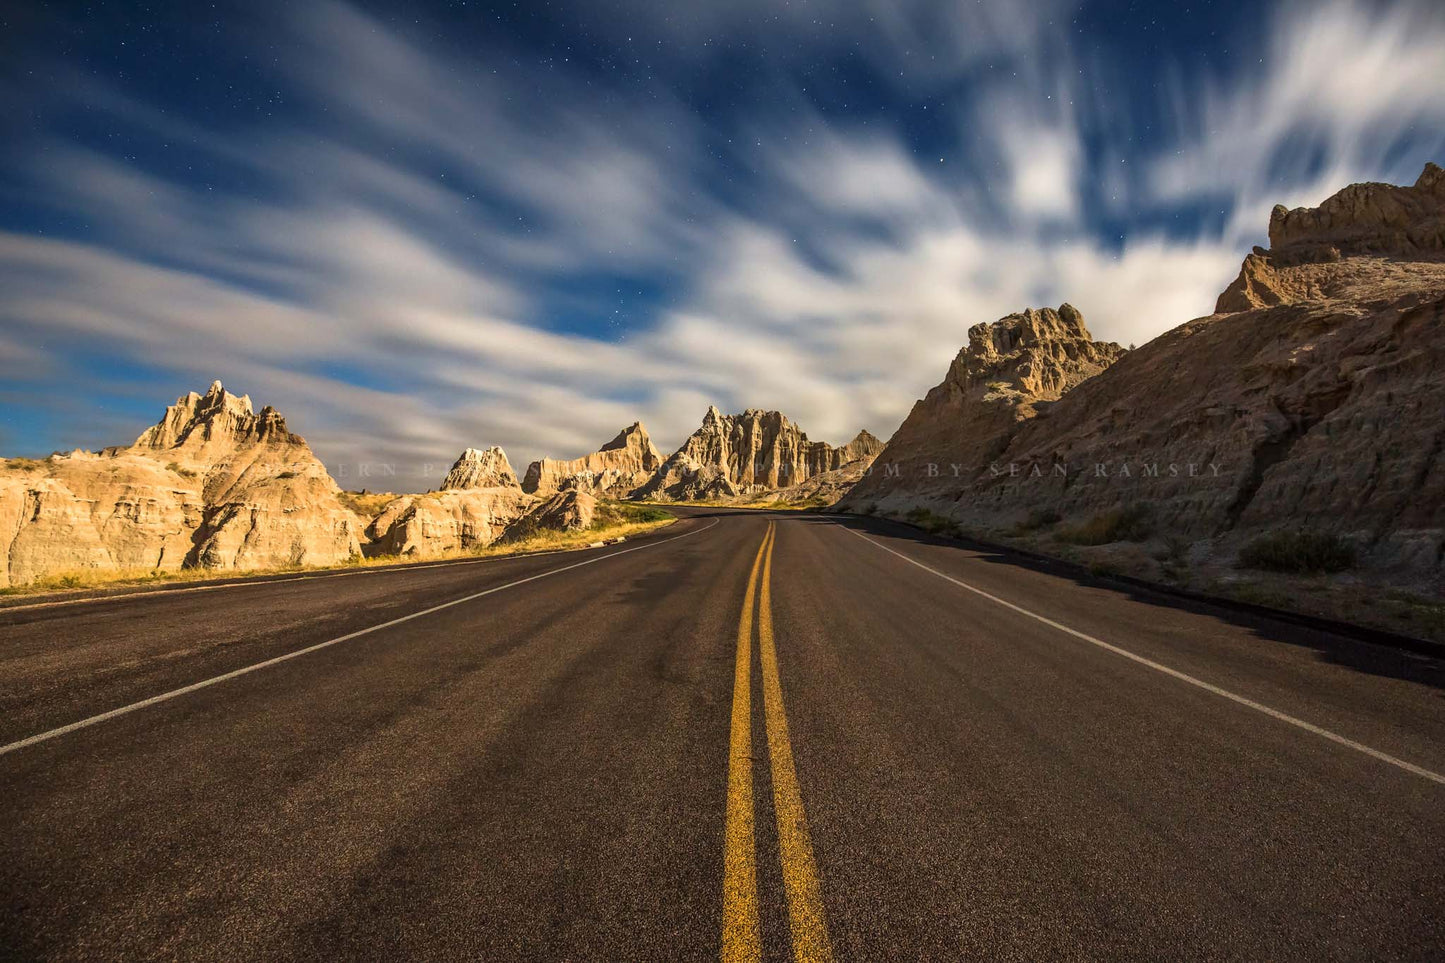 Road trip photography print of a highway leading through Badlands National Park, South Dakota by Sean Ramsey of Southern Plains Photography.